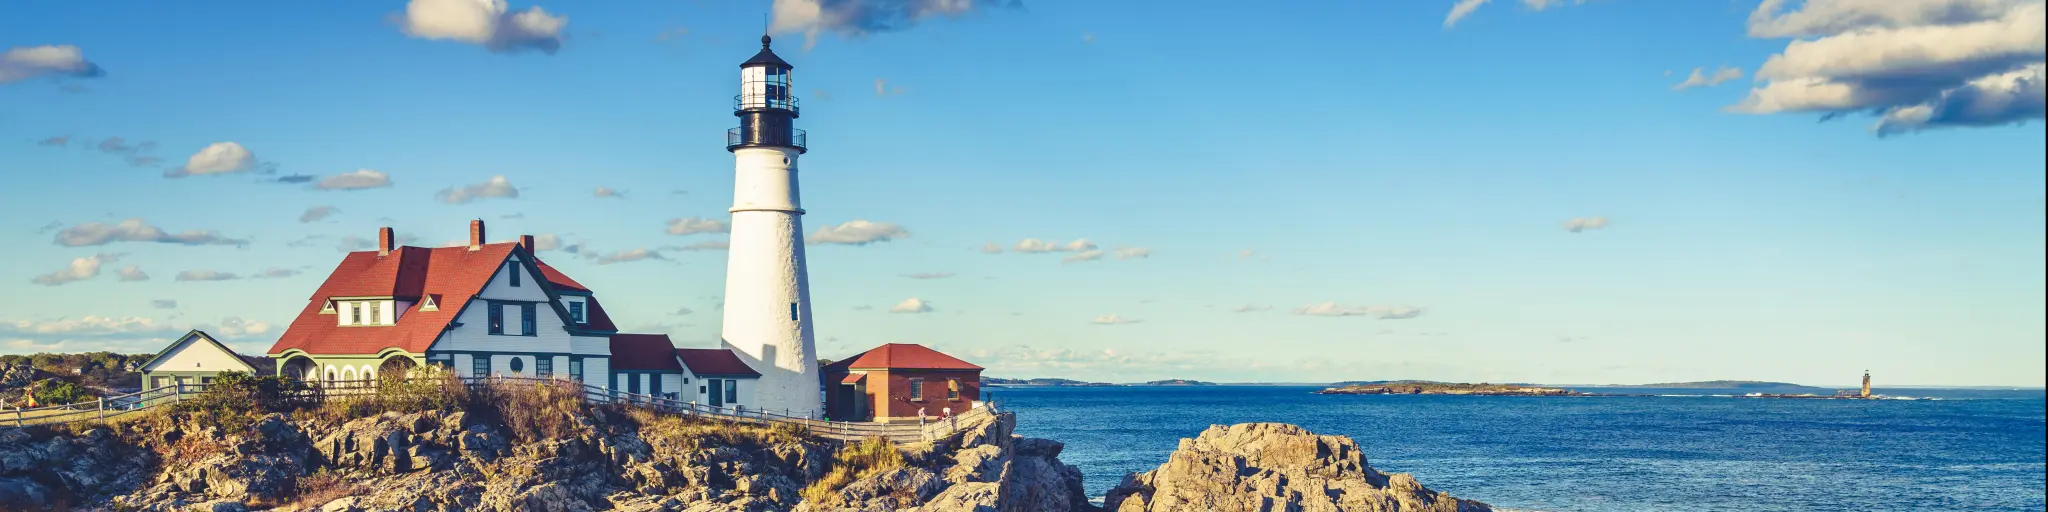 Portland, Maine, USA with a scenic view of the historic Portland Head Light in Cape Elizabeth, Maine on a sunny day.